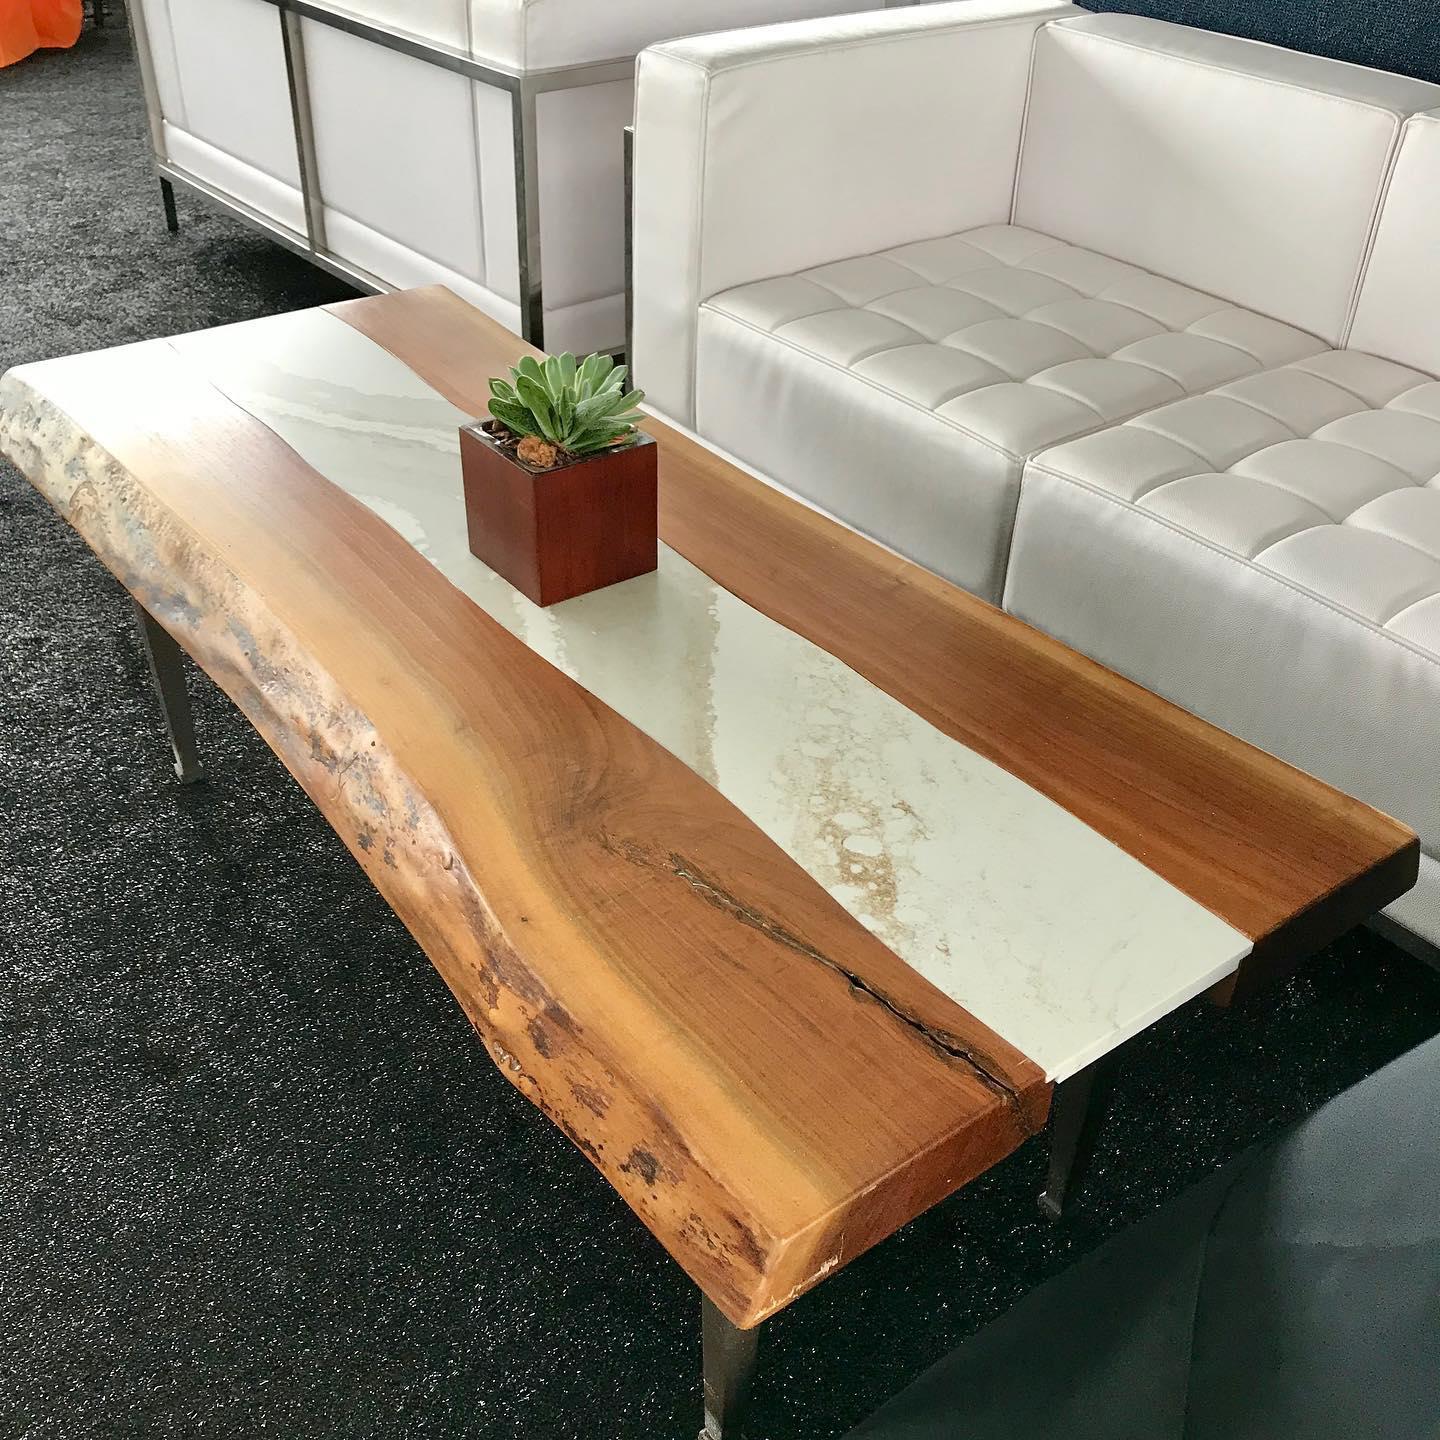 Natural Wood Coffee Table Creative Surfaces Countertops & Tile Sioux Falls (605)362-5853